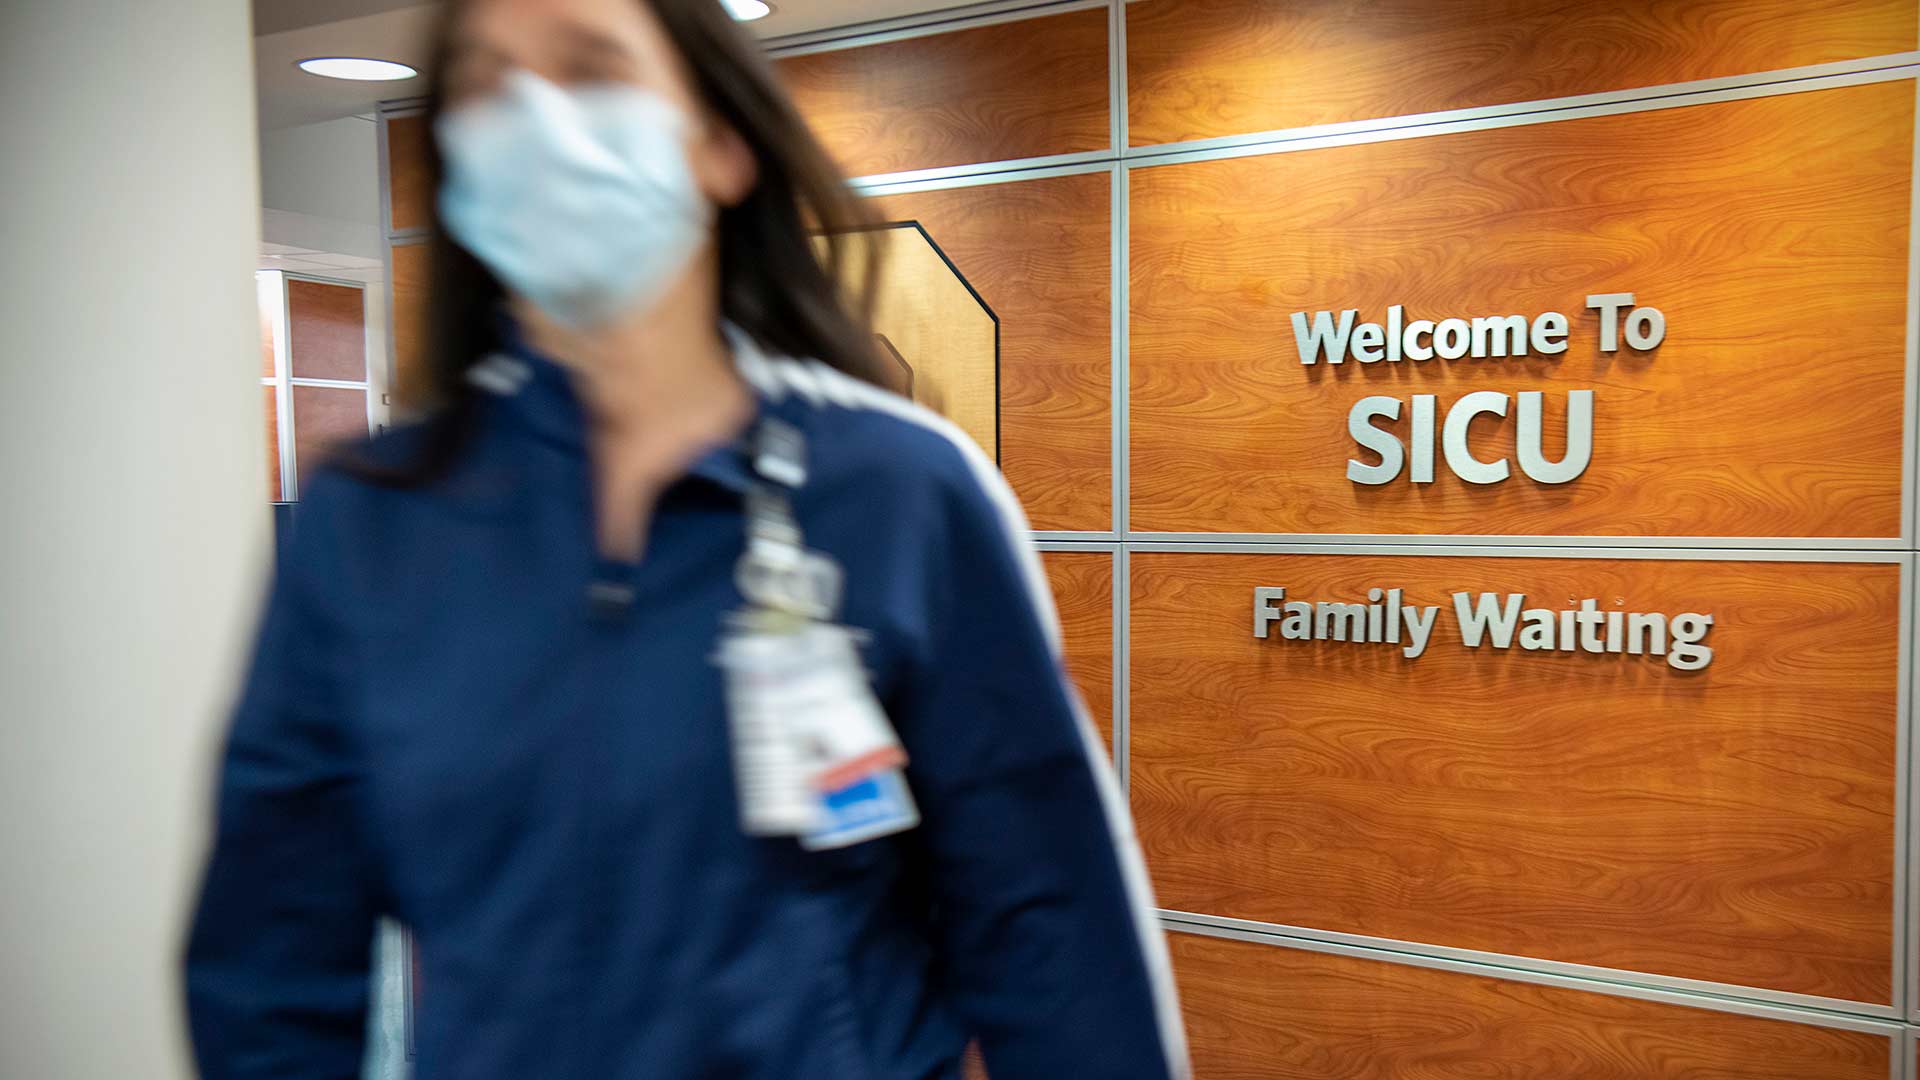 A nurse walking past a "Welcome to SICU" sign